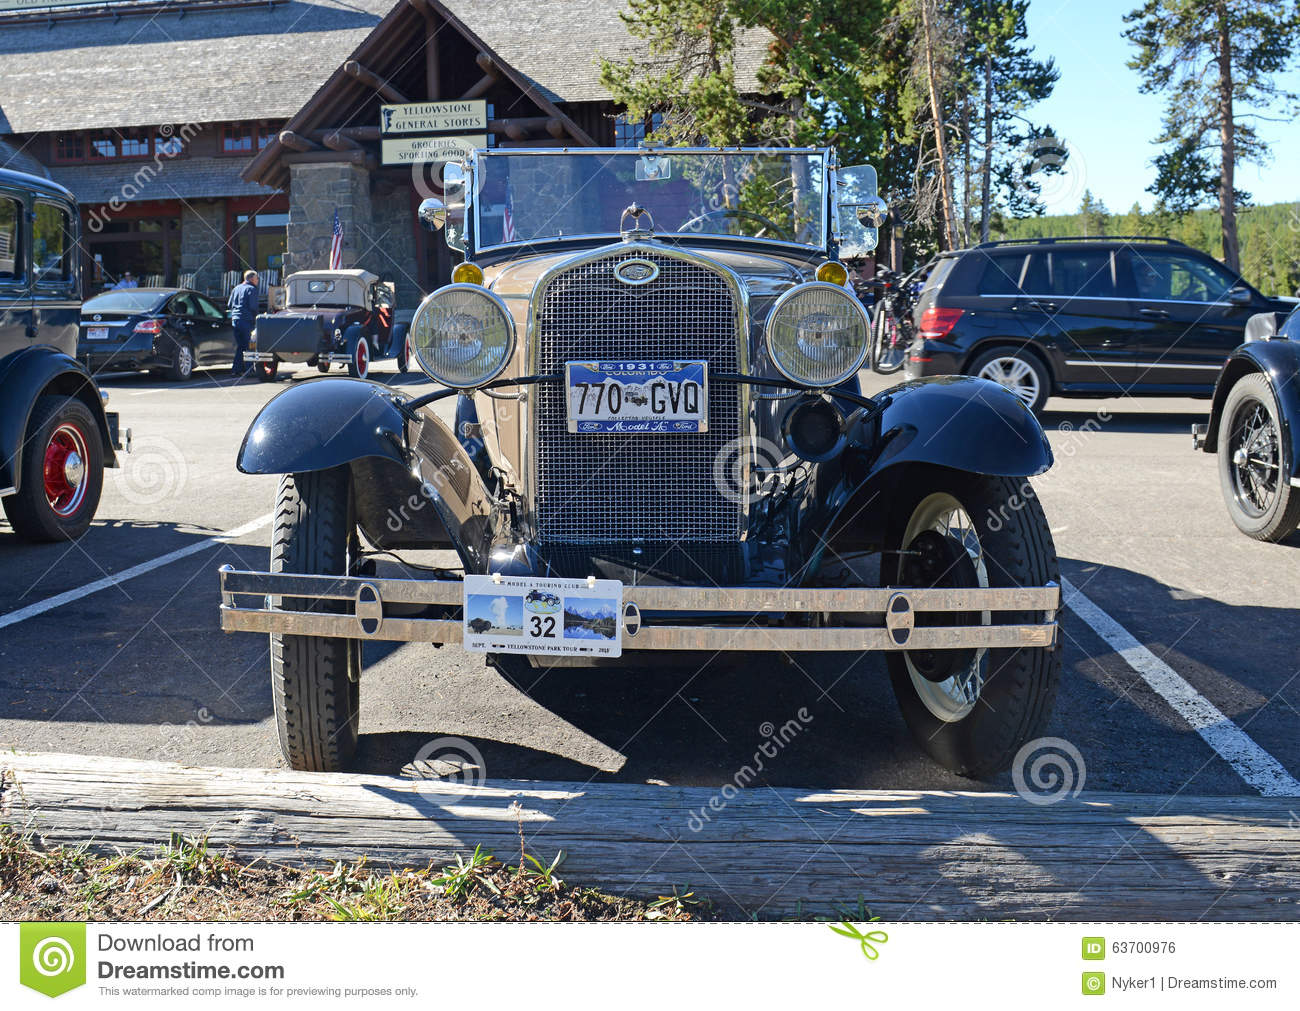     2015 The Model A Ford Successor Of The Model T Was One Of The